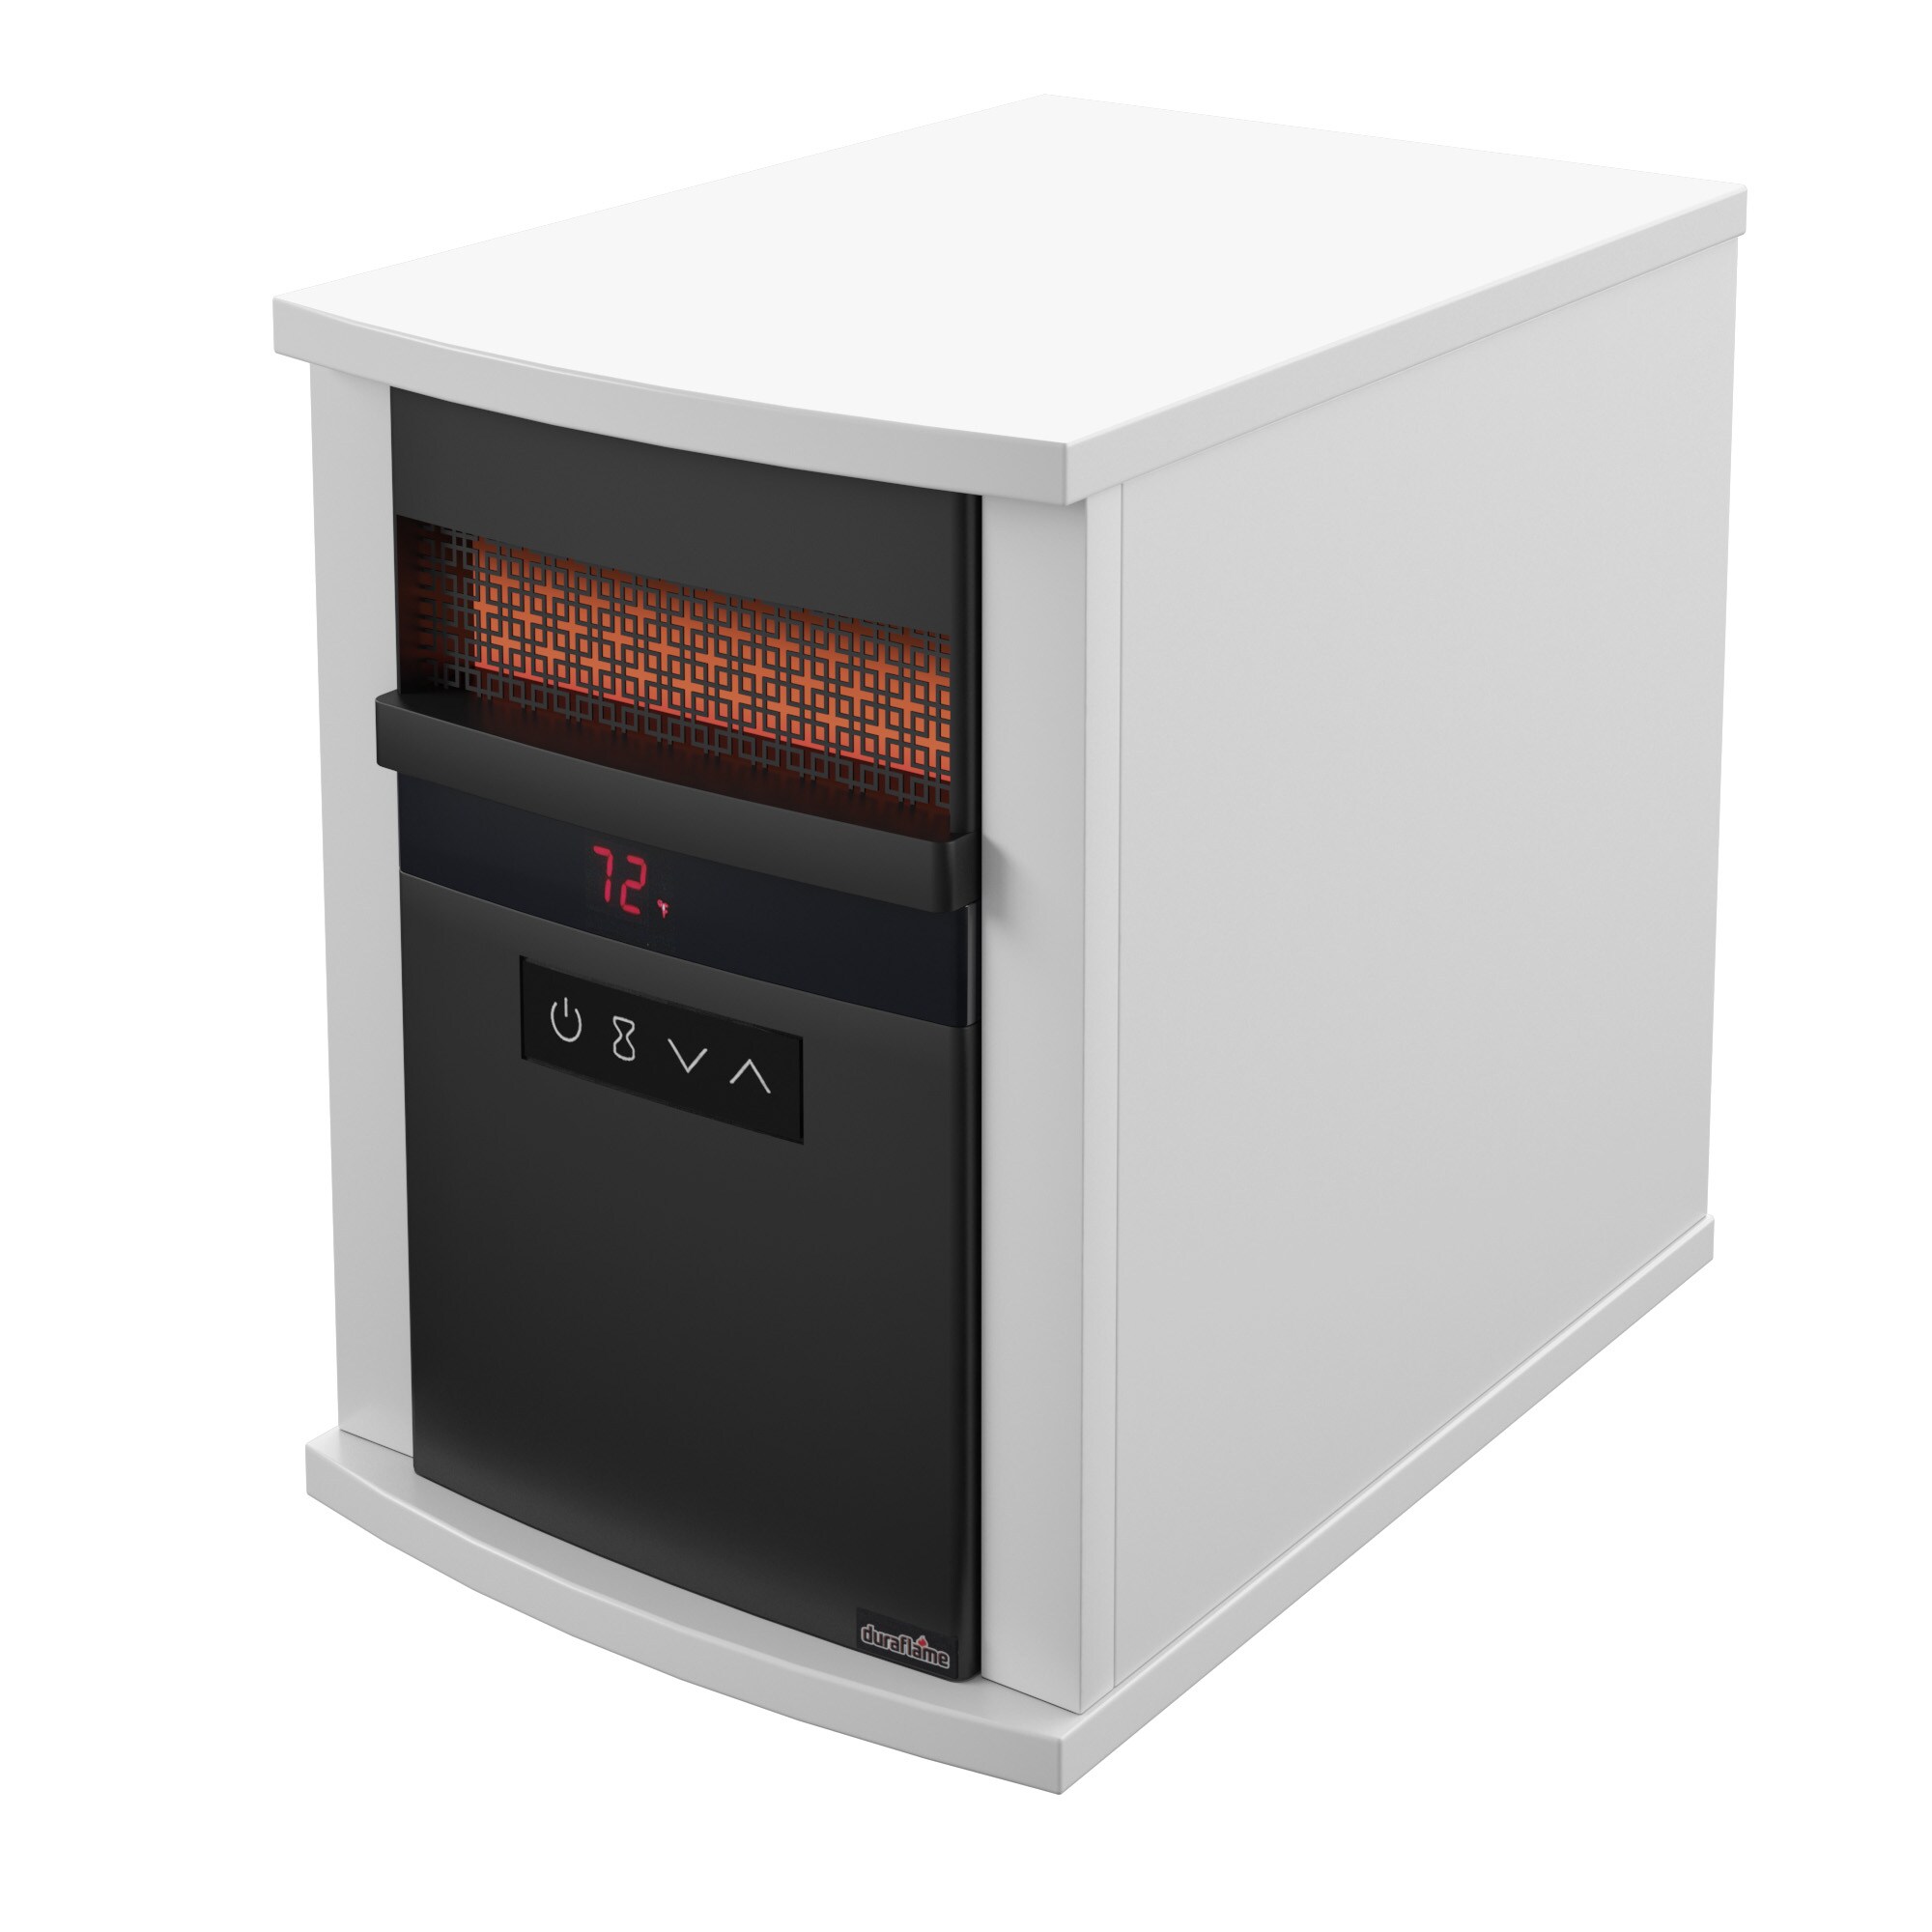 Duraflame 1500-Watt Infrared Cabinet Indoor Electric Space Heater with Thermostat and Remote Included